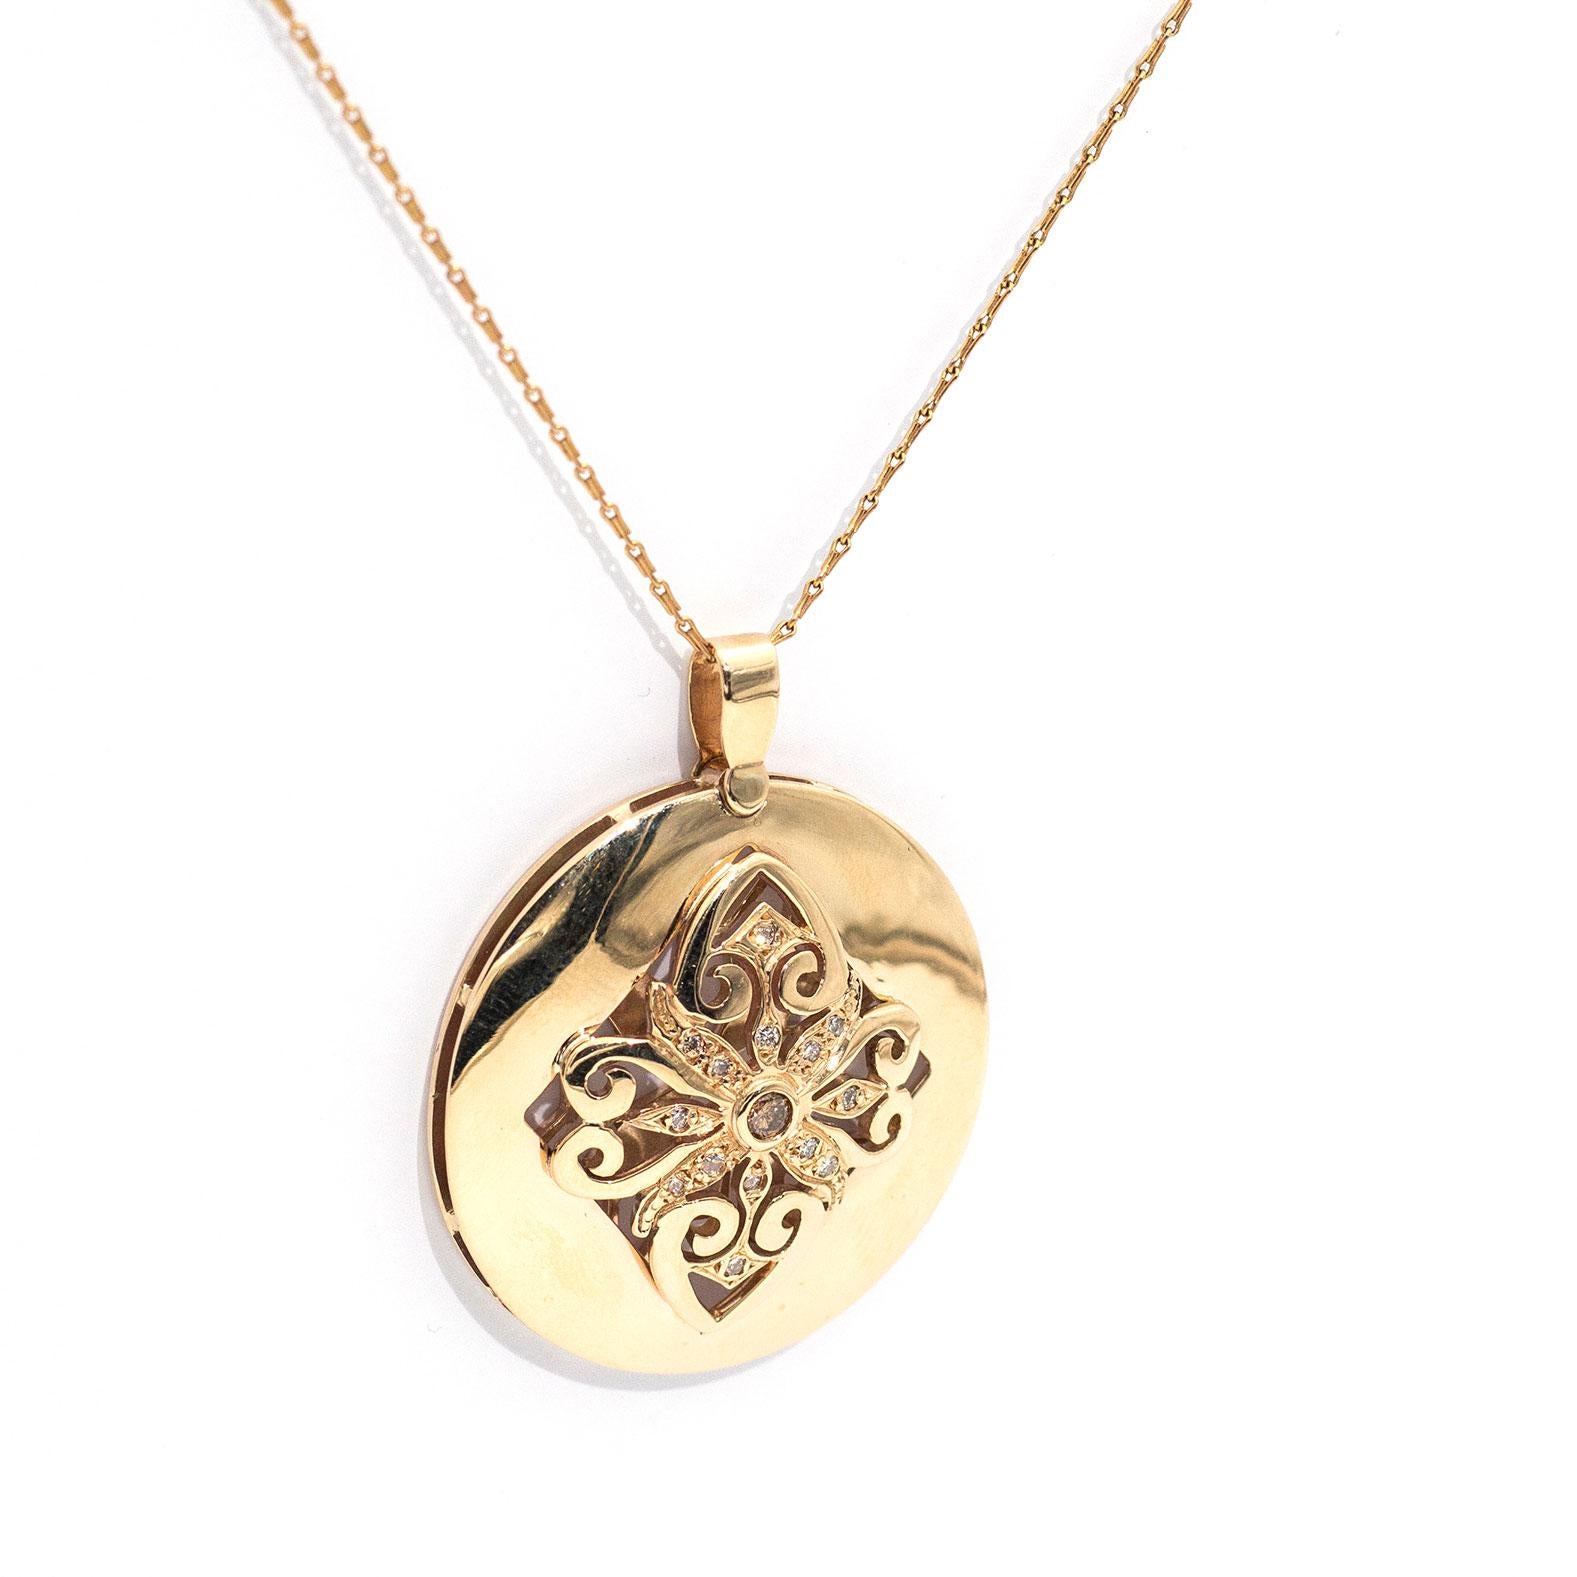 This beautifully unique pendant is forged in 9 cart yellow gold and features a central filigree motif carefully set with a lovely central cognac round brilliant cut diamond and is encompassed by sparkling white round brilliant cut diamonds and